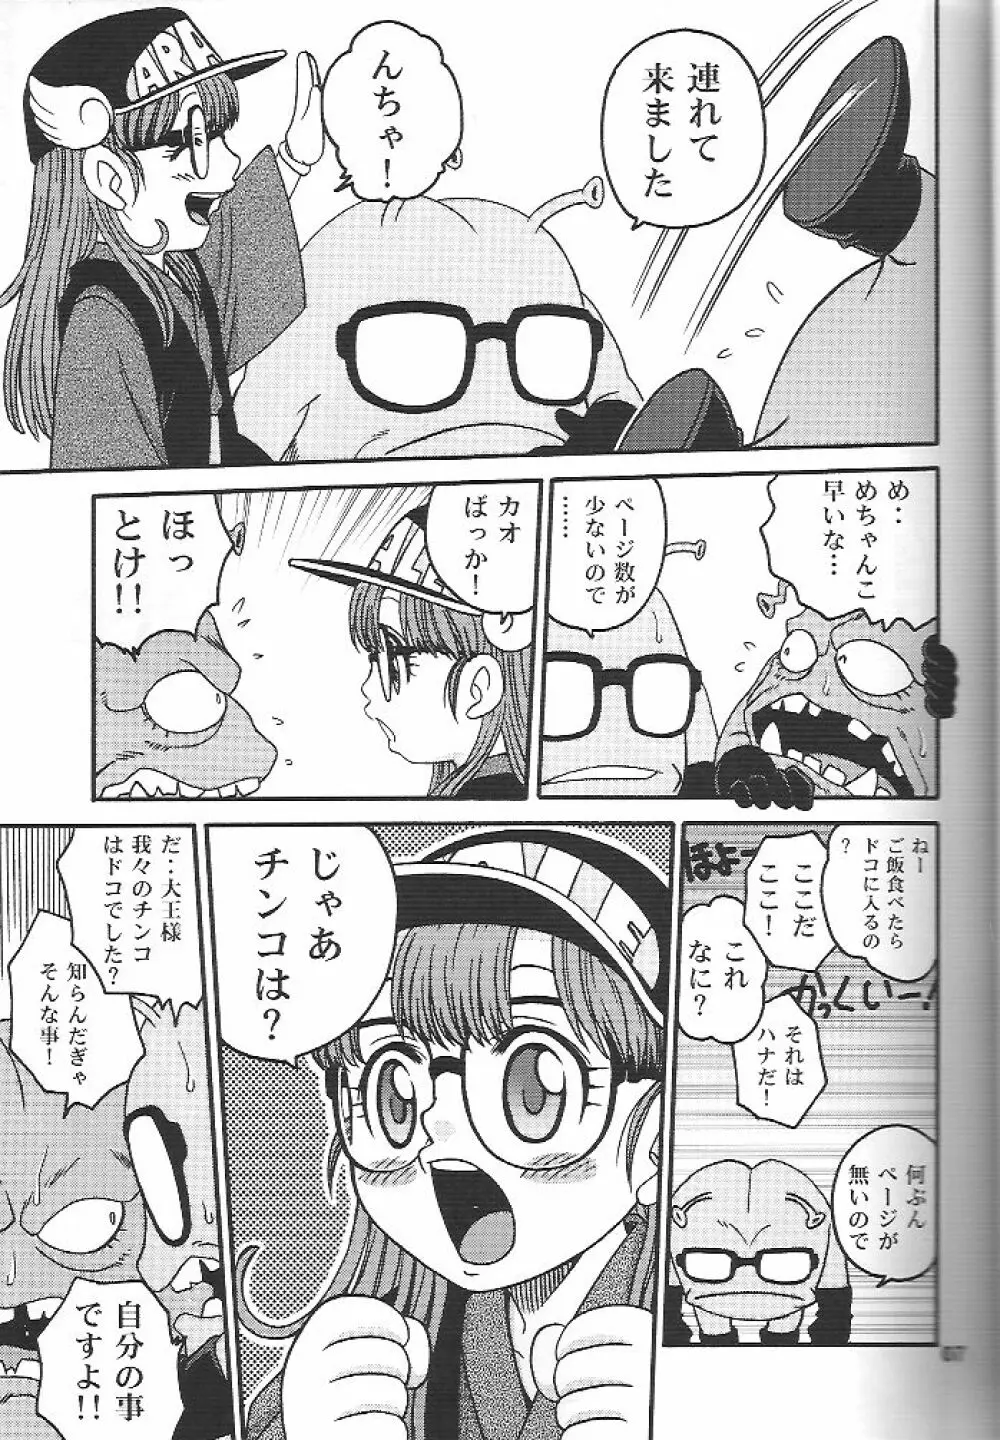 PROJECT ARALE 2 - page6